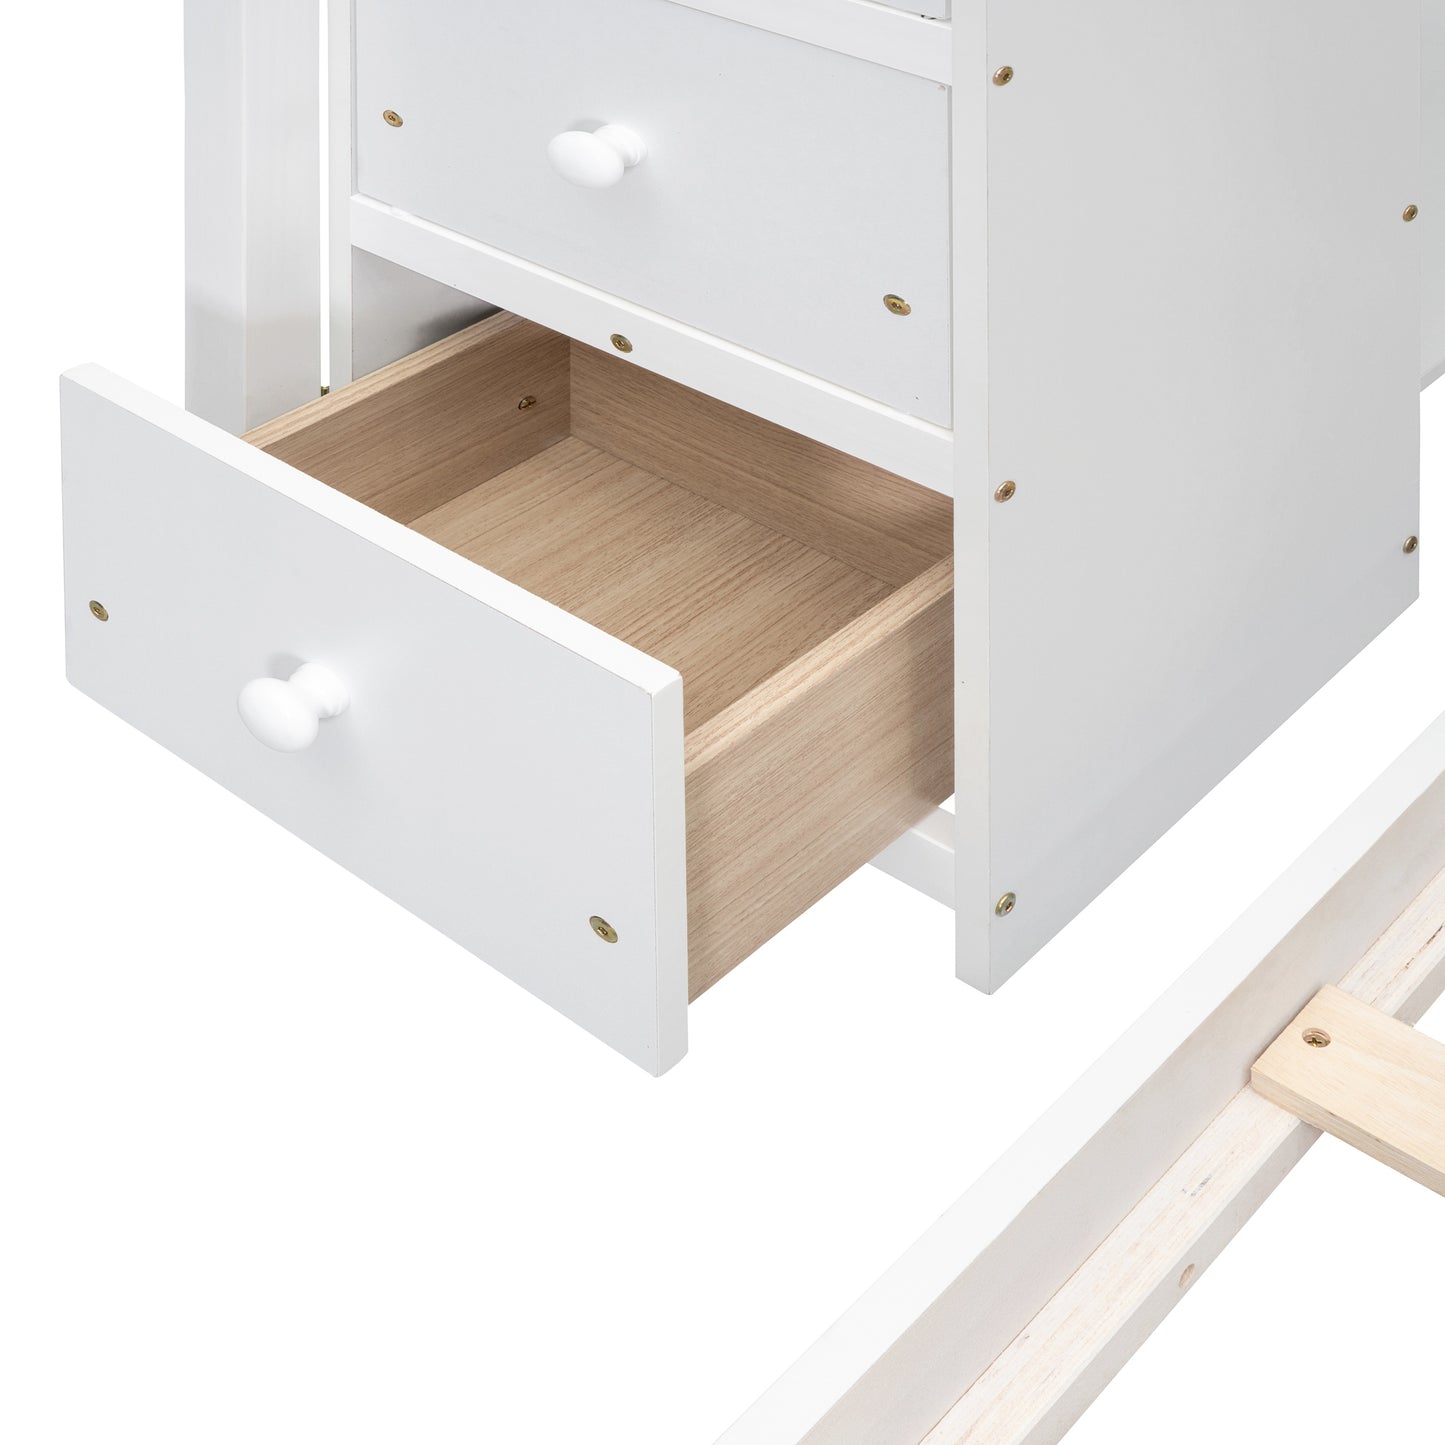 Twin Over Full Bunk Bed with 3-layer Shelves, Drawers and Storage Stairs, White